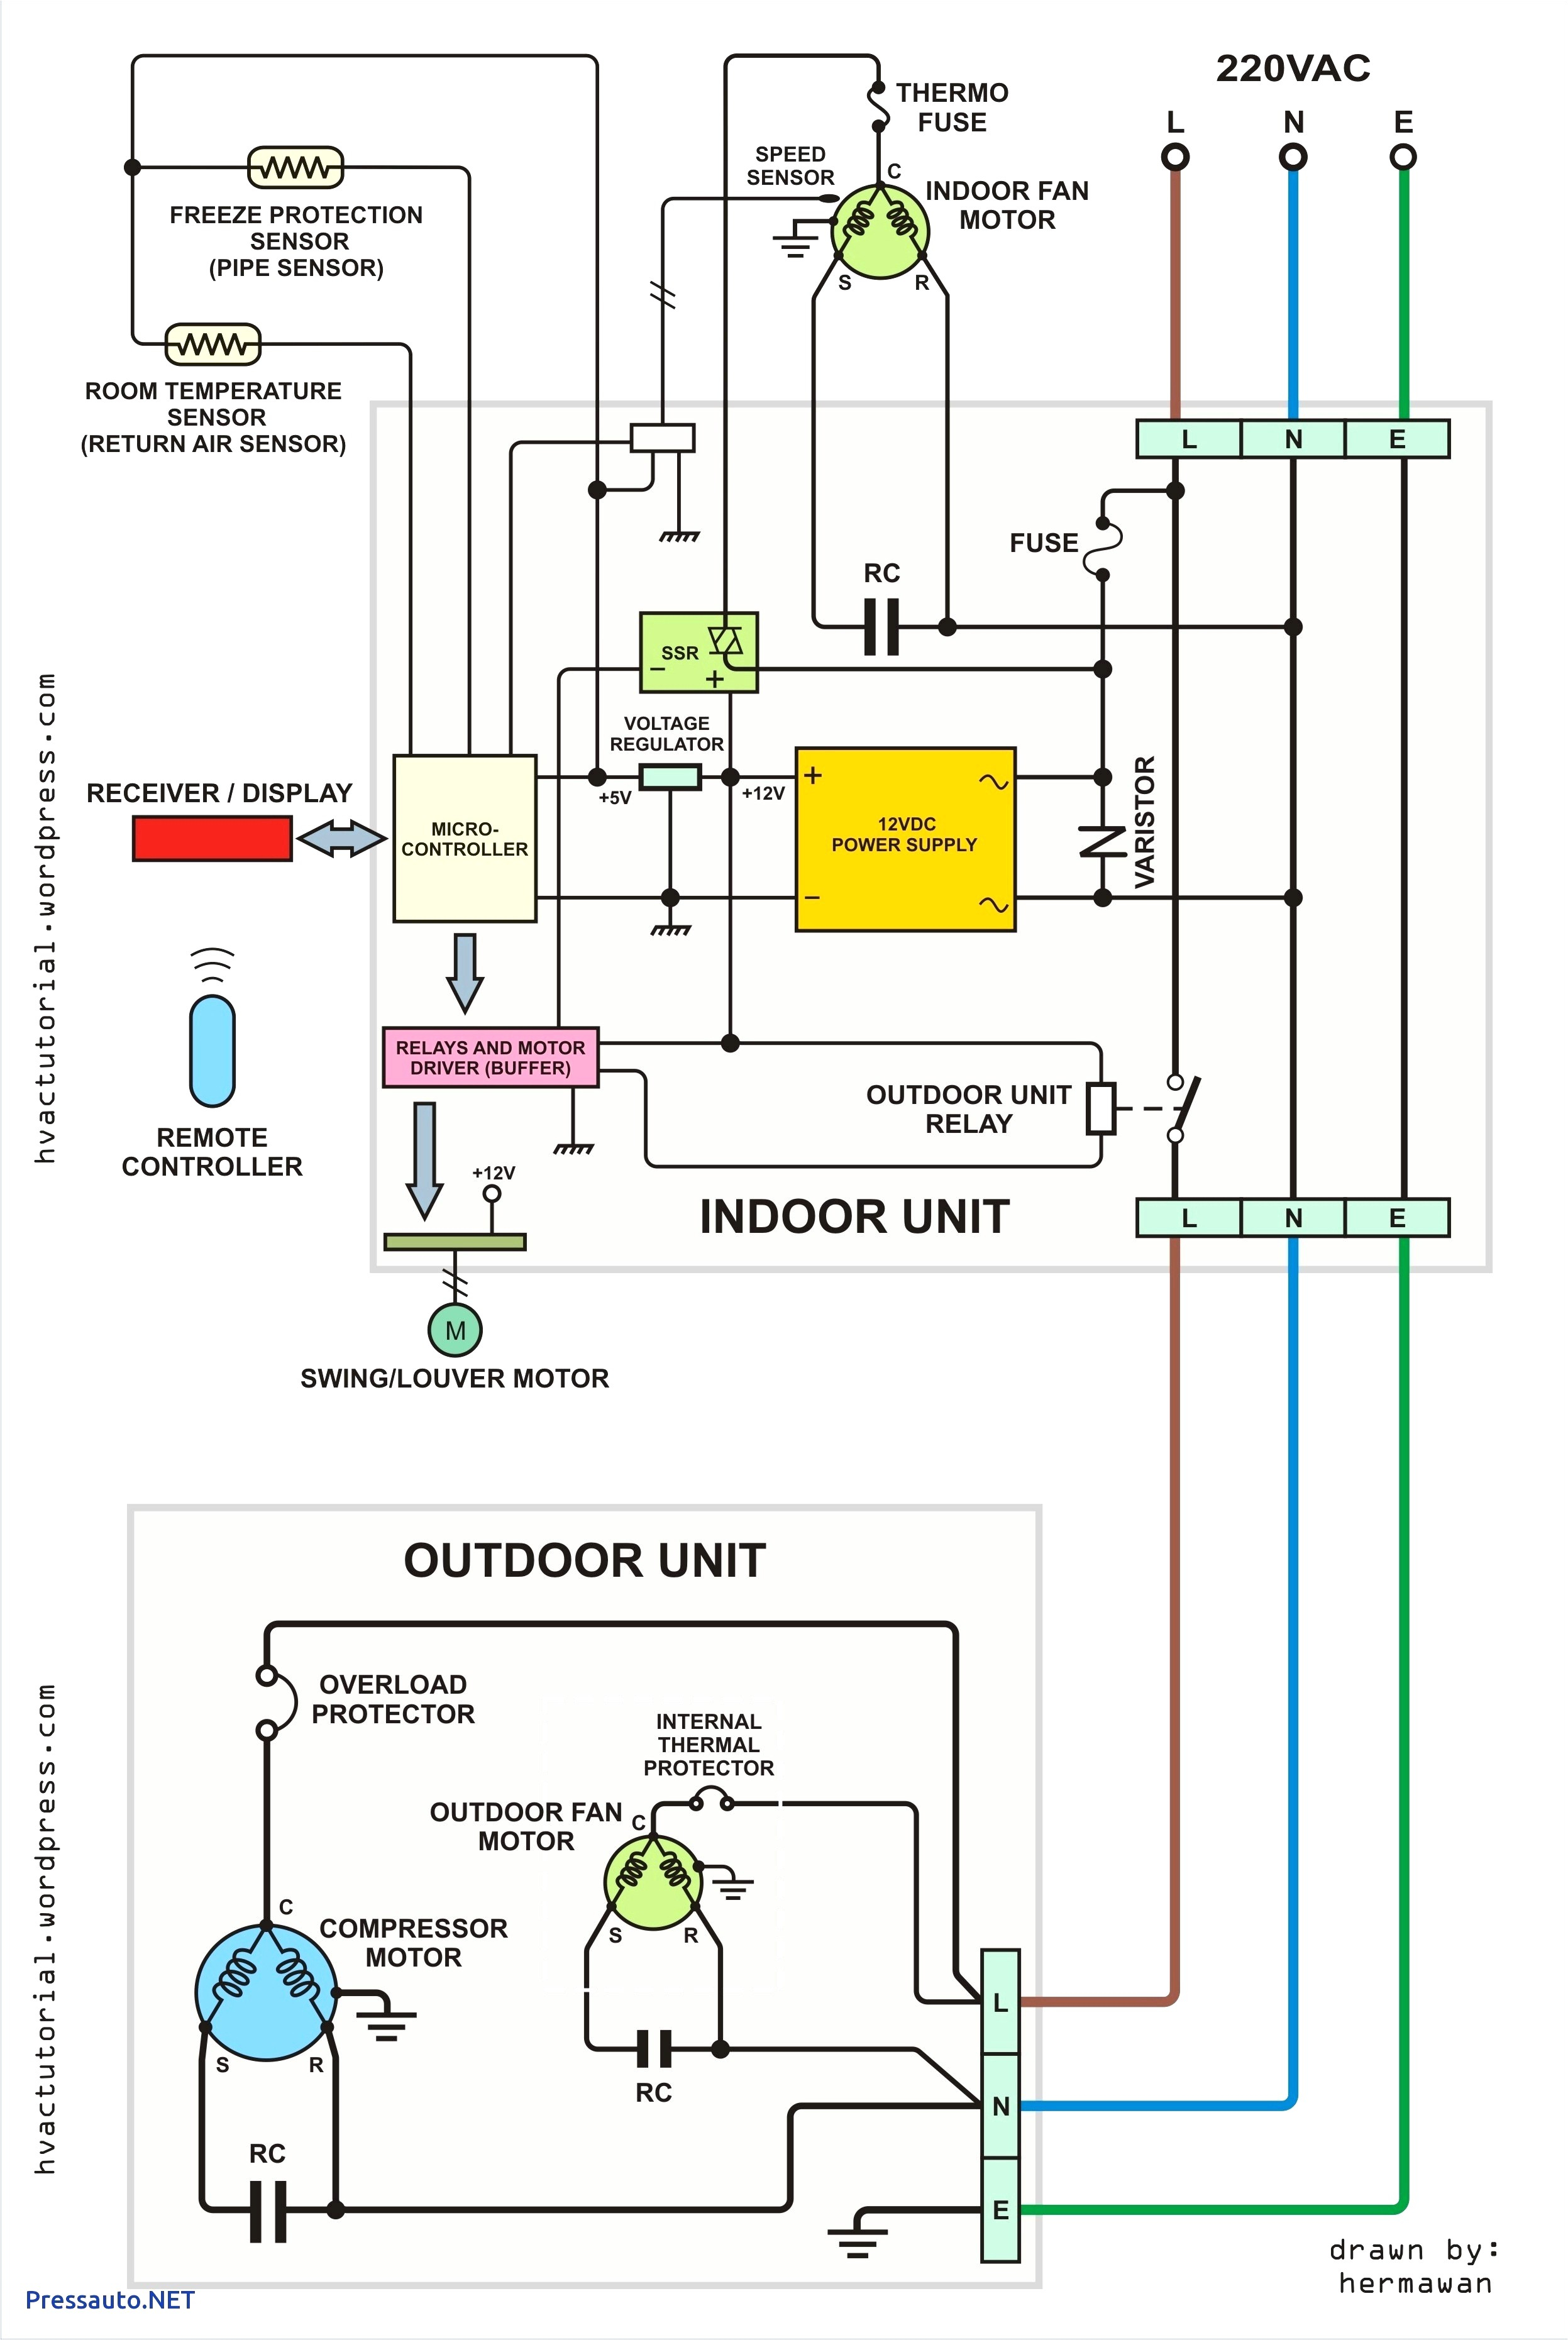 jayco hot water heater wiring diagram wiring diagram review alpine furnace wiring diagram source aprilaire humidistat